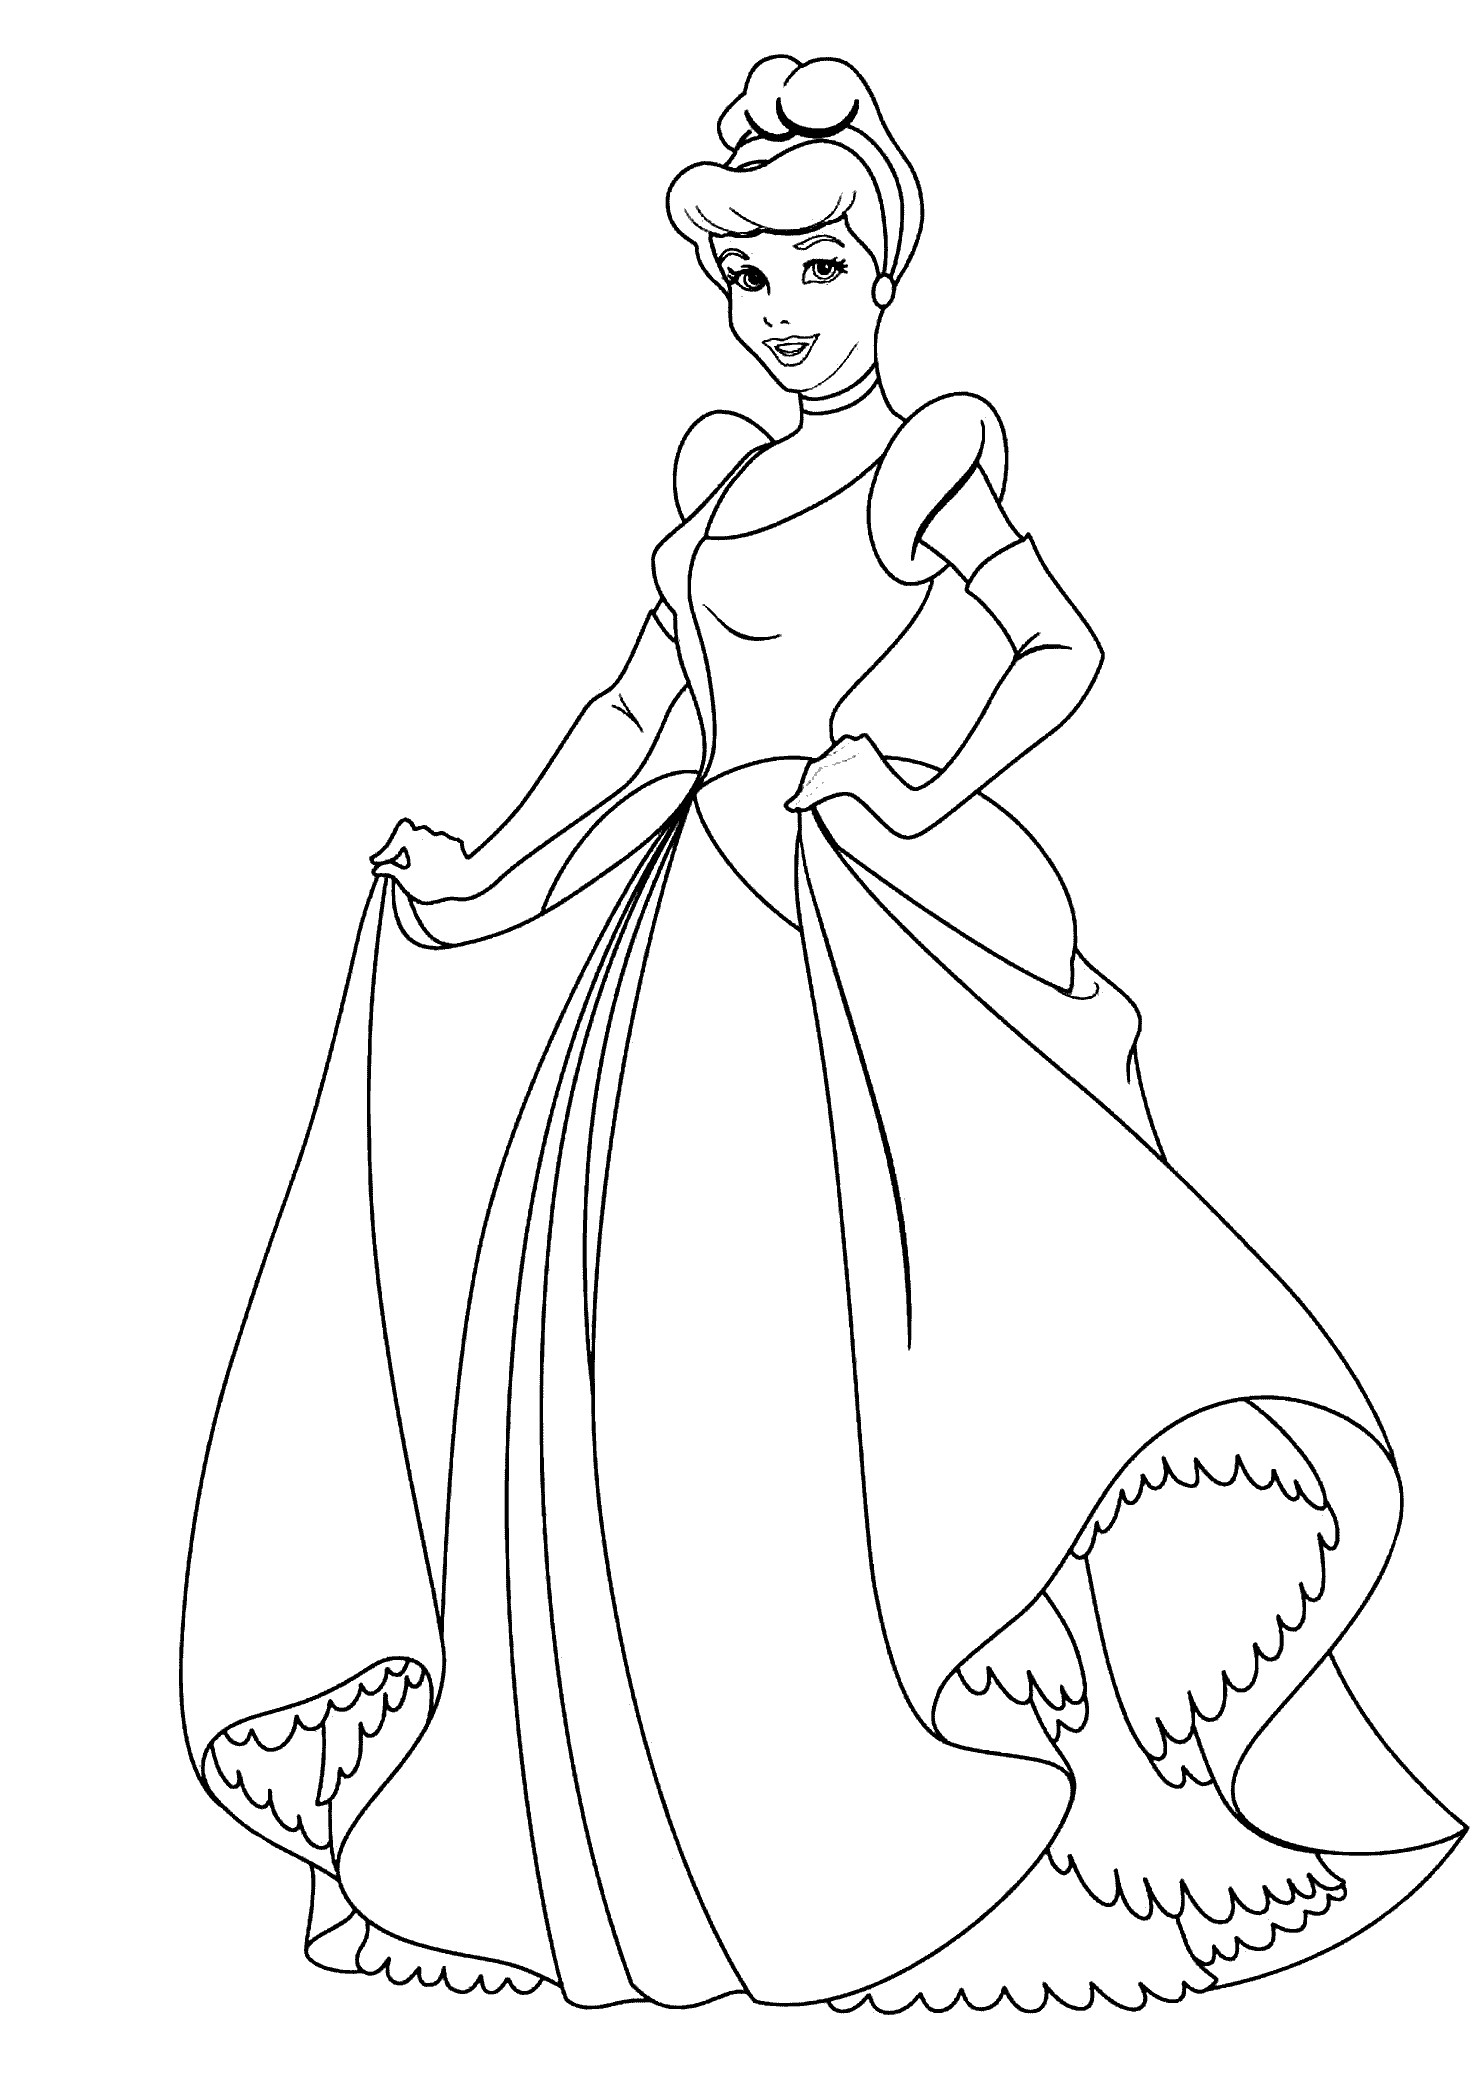 Coloring Pages For Kids Princesses
 Cinderella princess coloring pages for kids printable